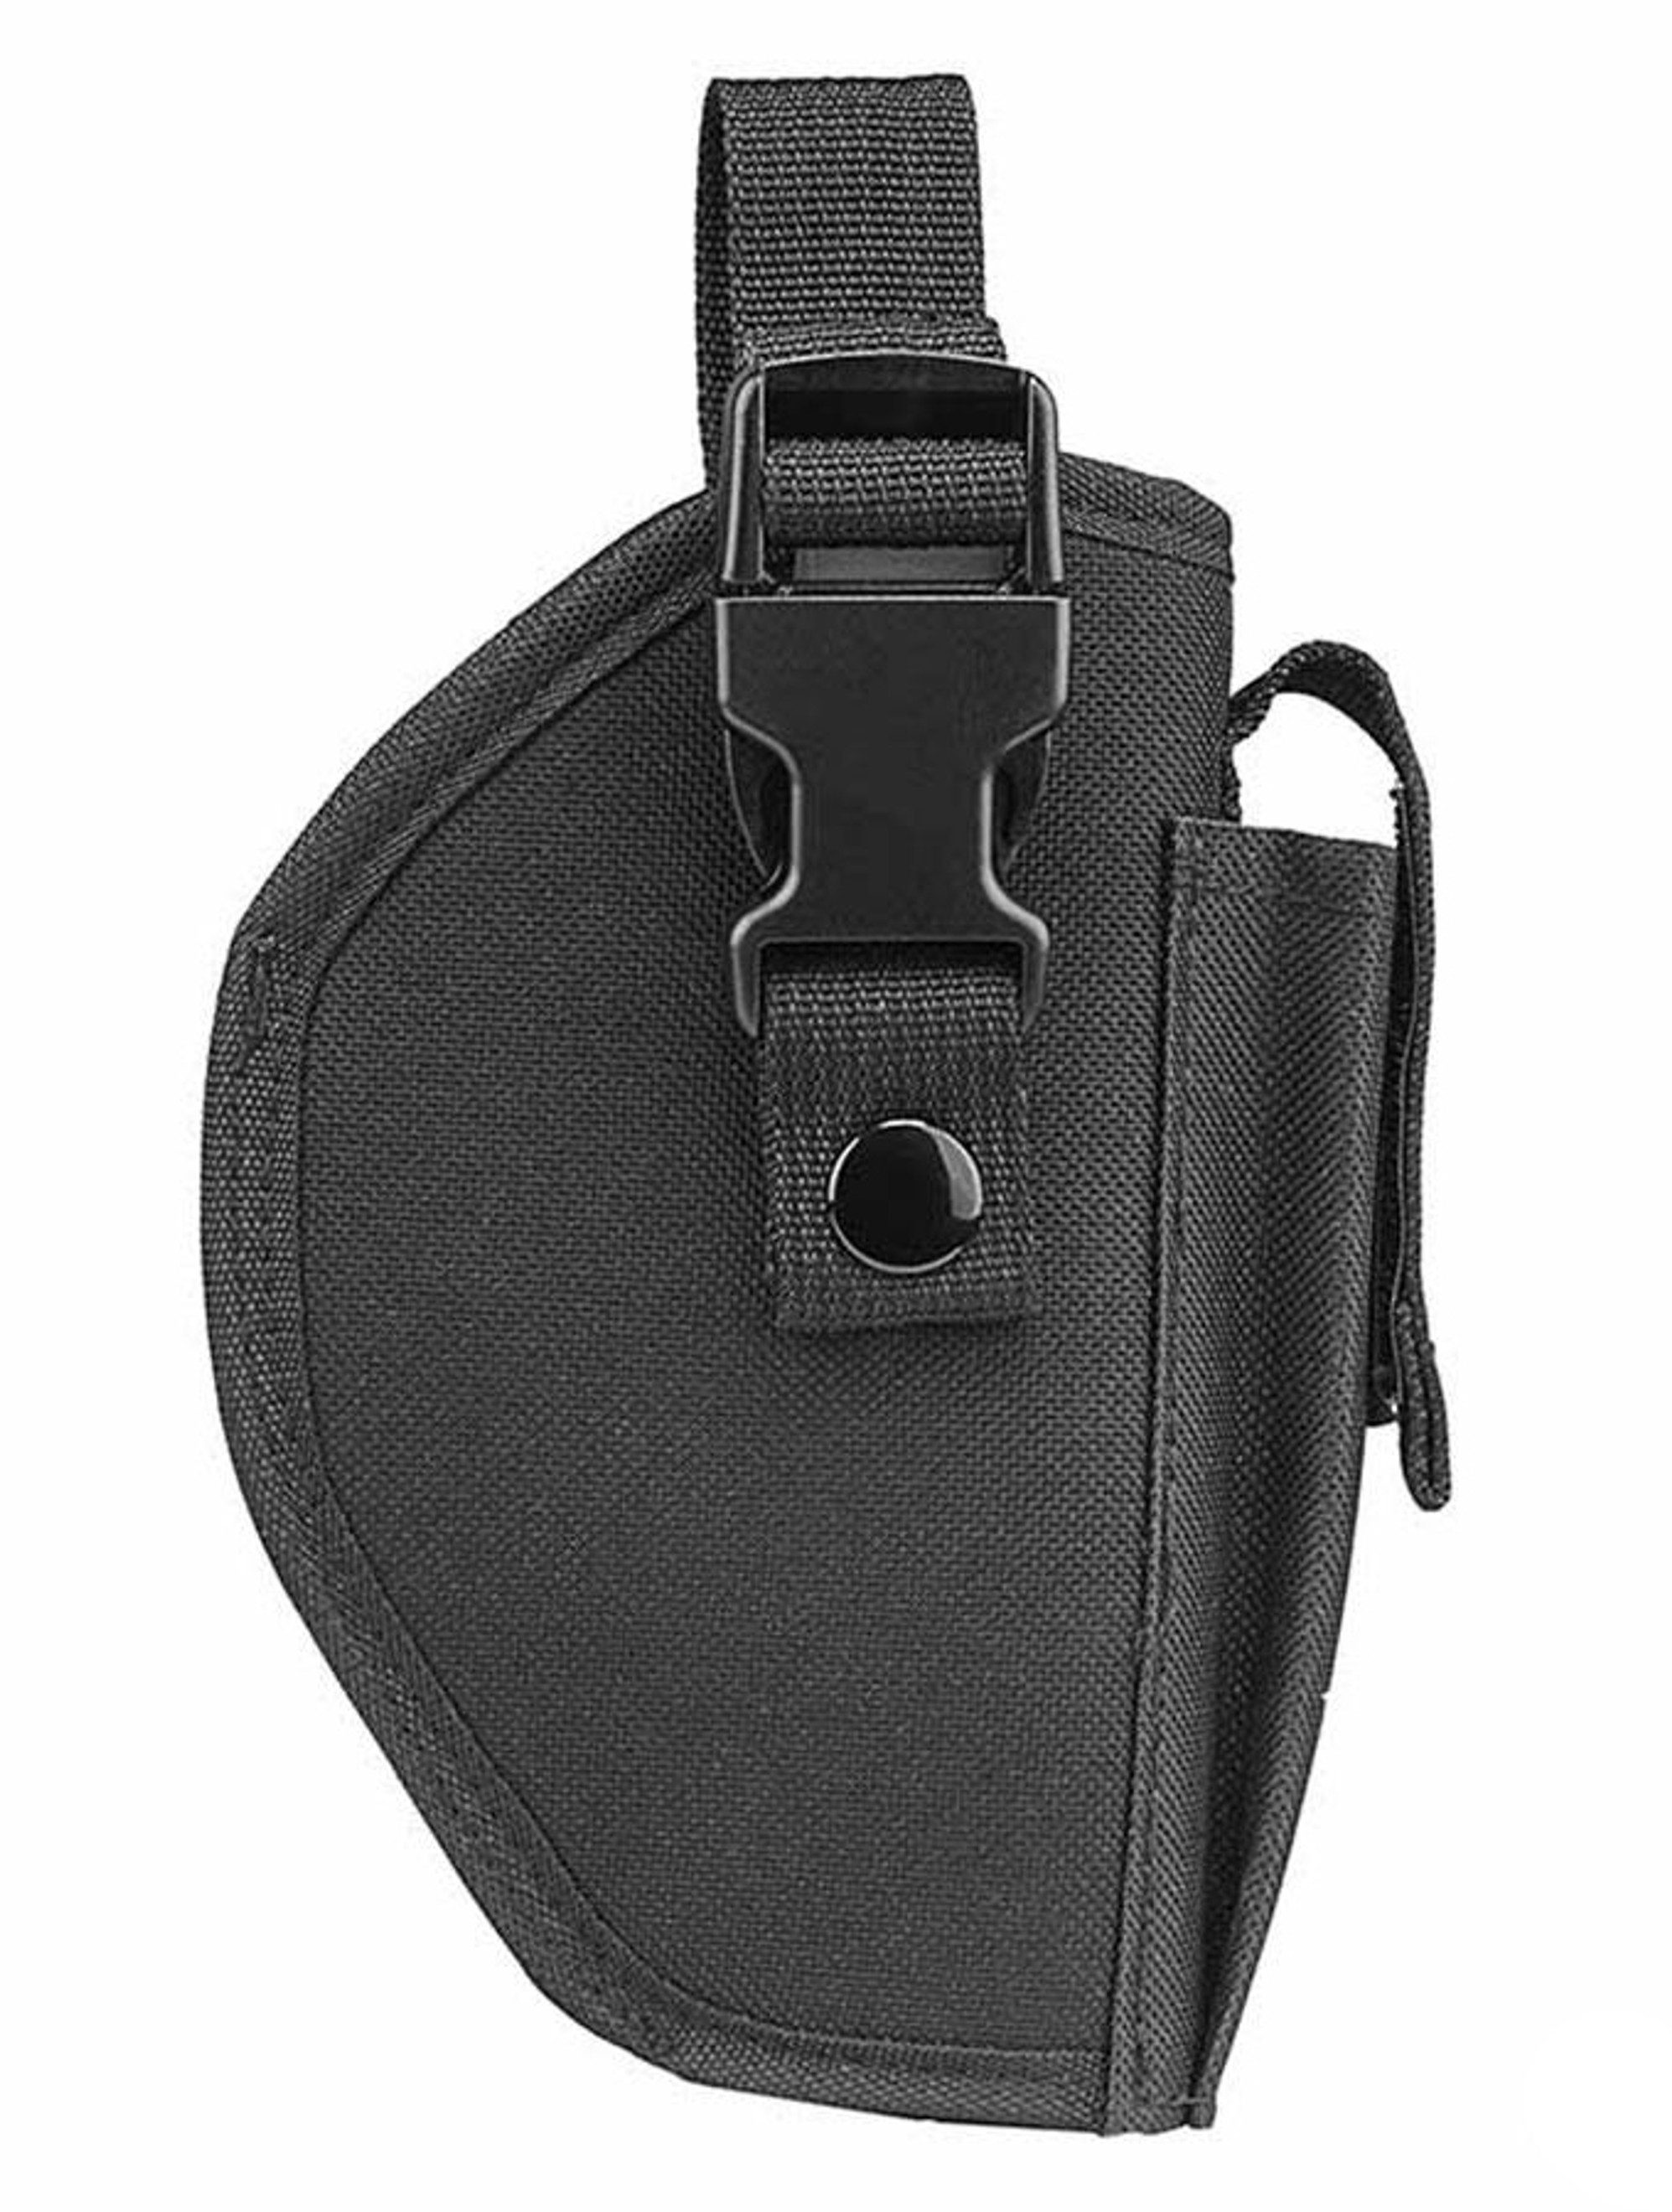 NcSTAR Belt Mounted Fabric Pistol Holster & Mag Pouch